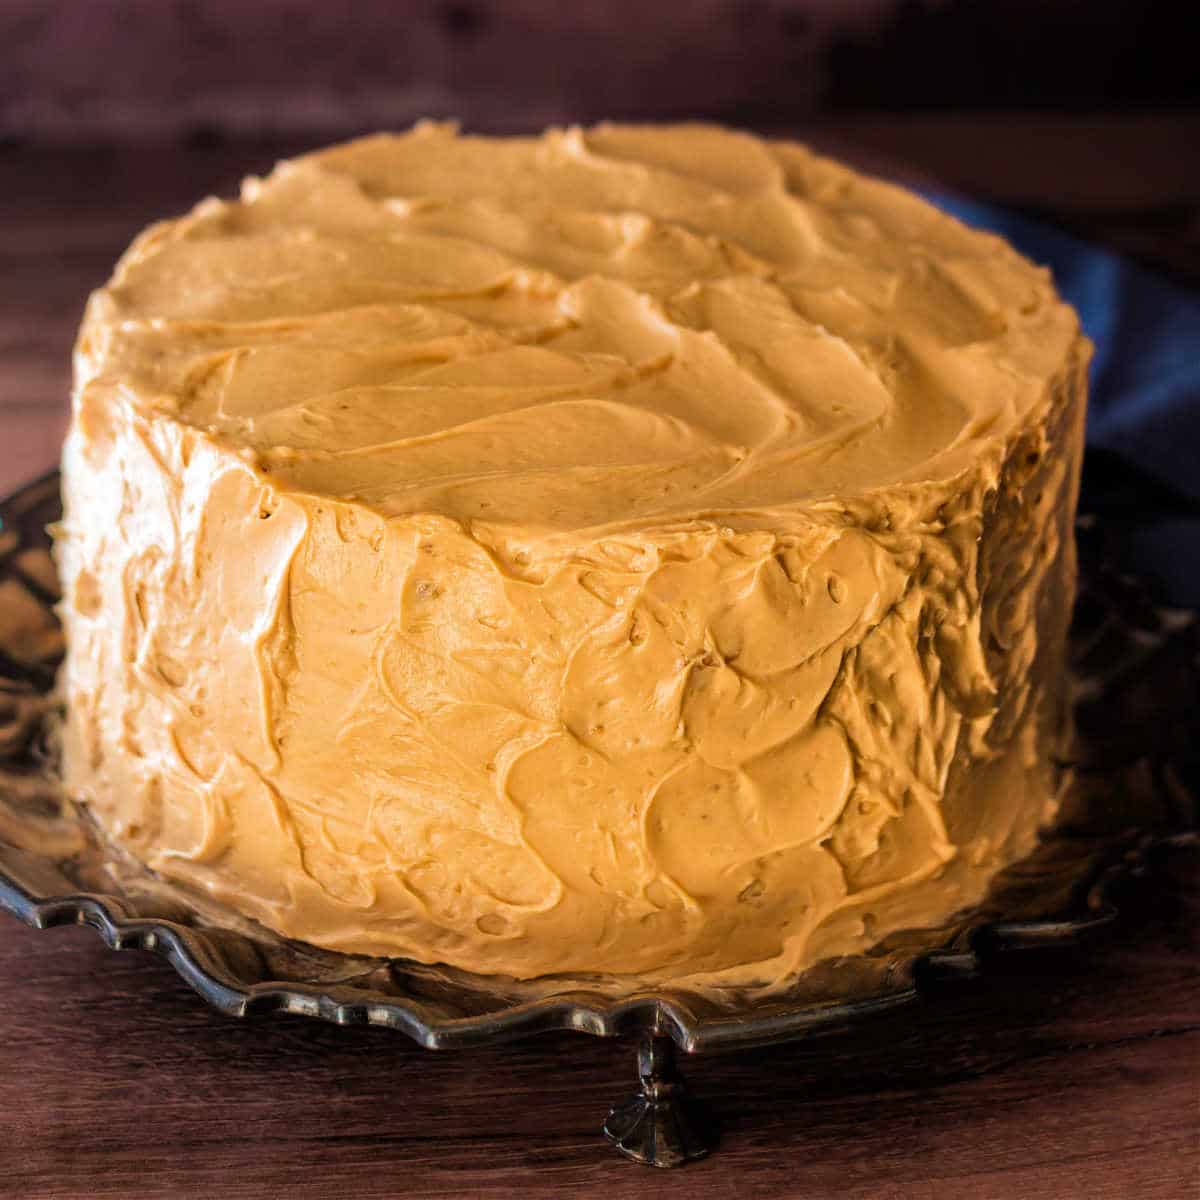 Close up of a whole cake covered in fluffy caramel frosting.